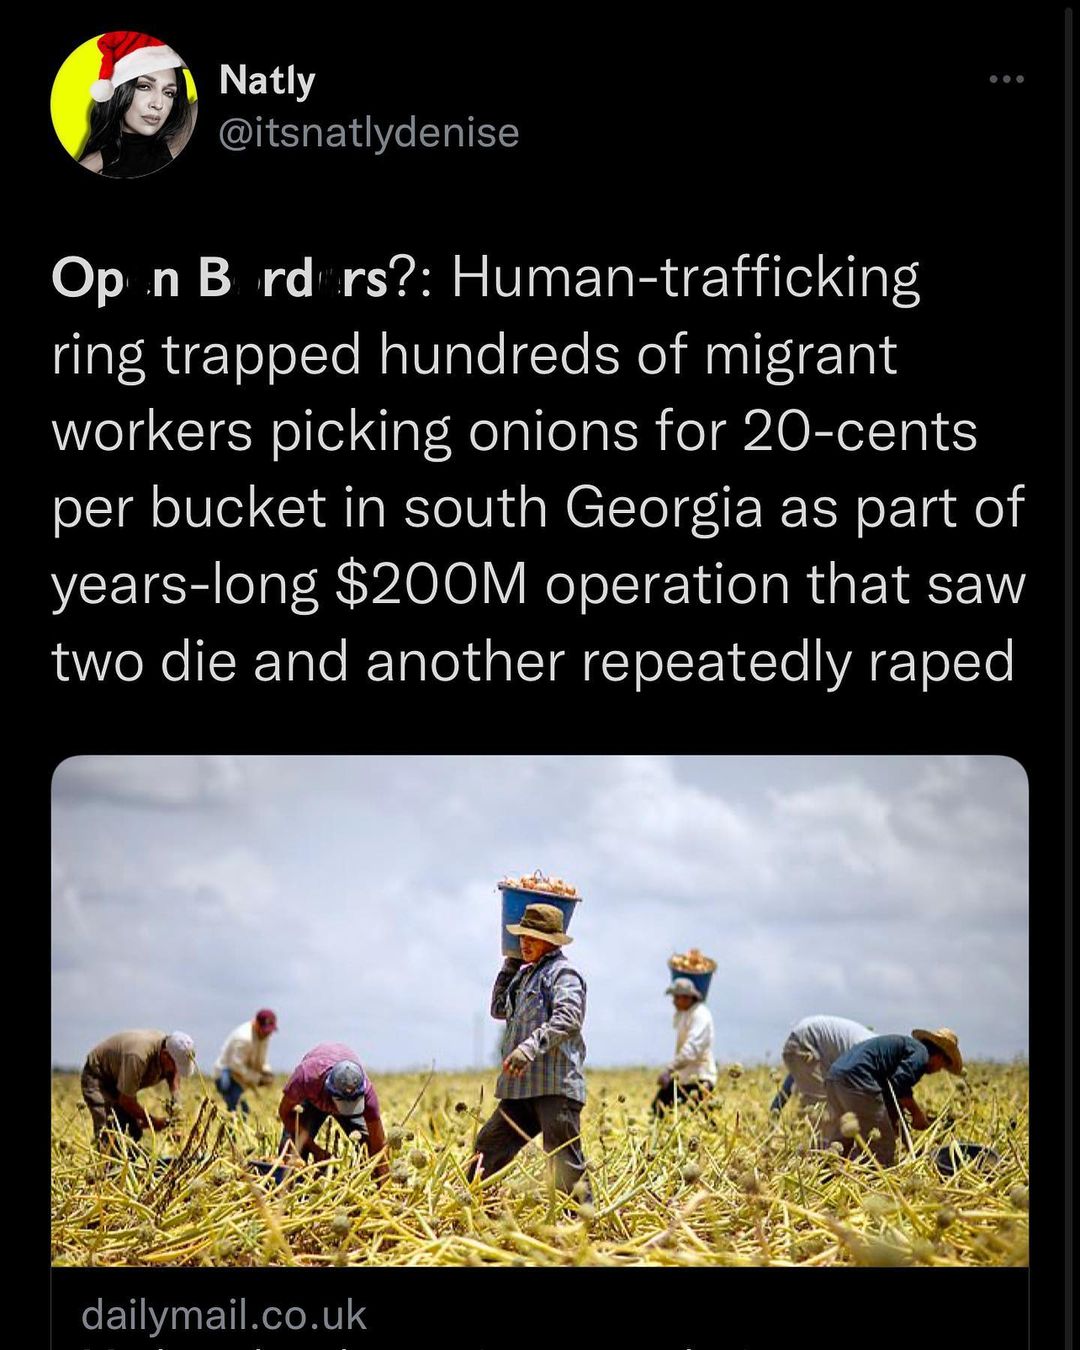 You are currently viewing Open Borders: Human-trafficking ring trapped hundreds of migrant workers picking onions for 20-cents per bucket in south Georgia as part of years-long $200M operation that saw two die and another repeatedly raped